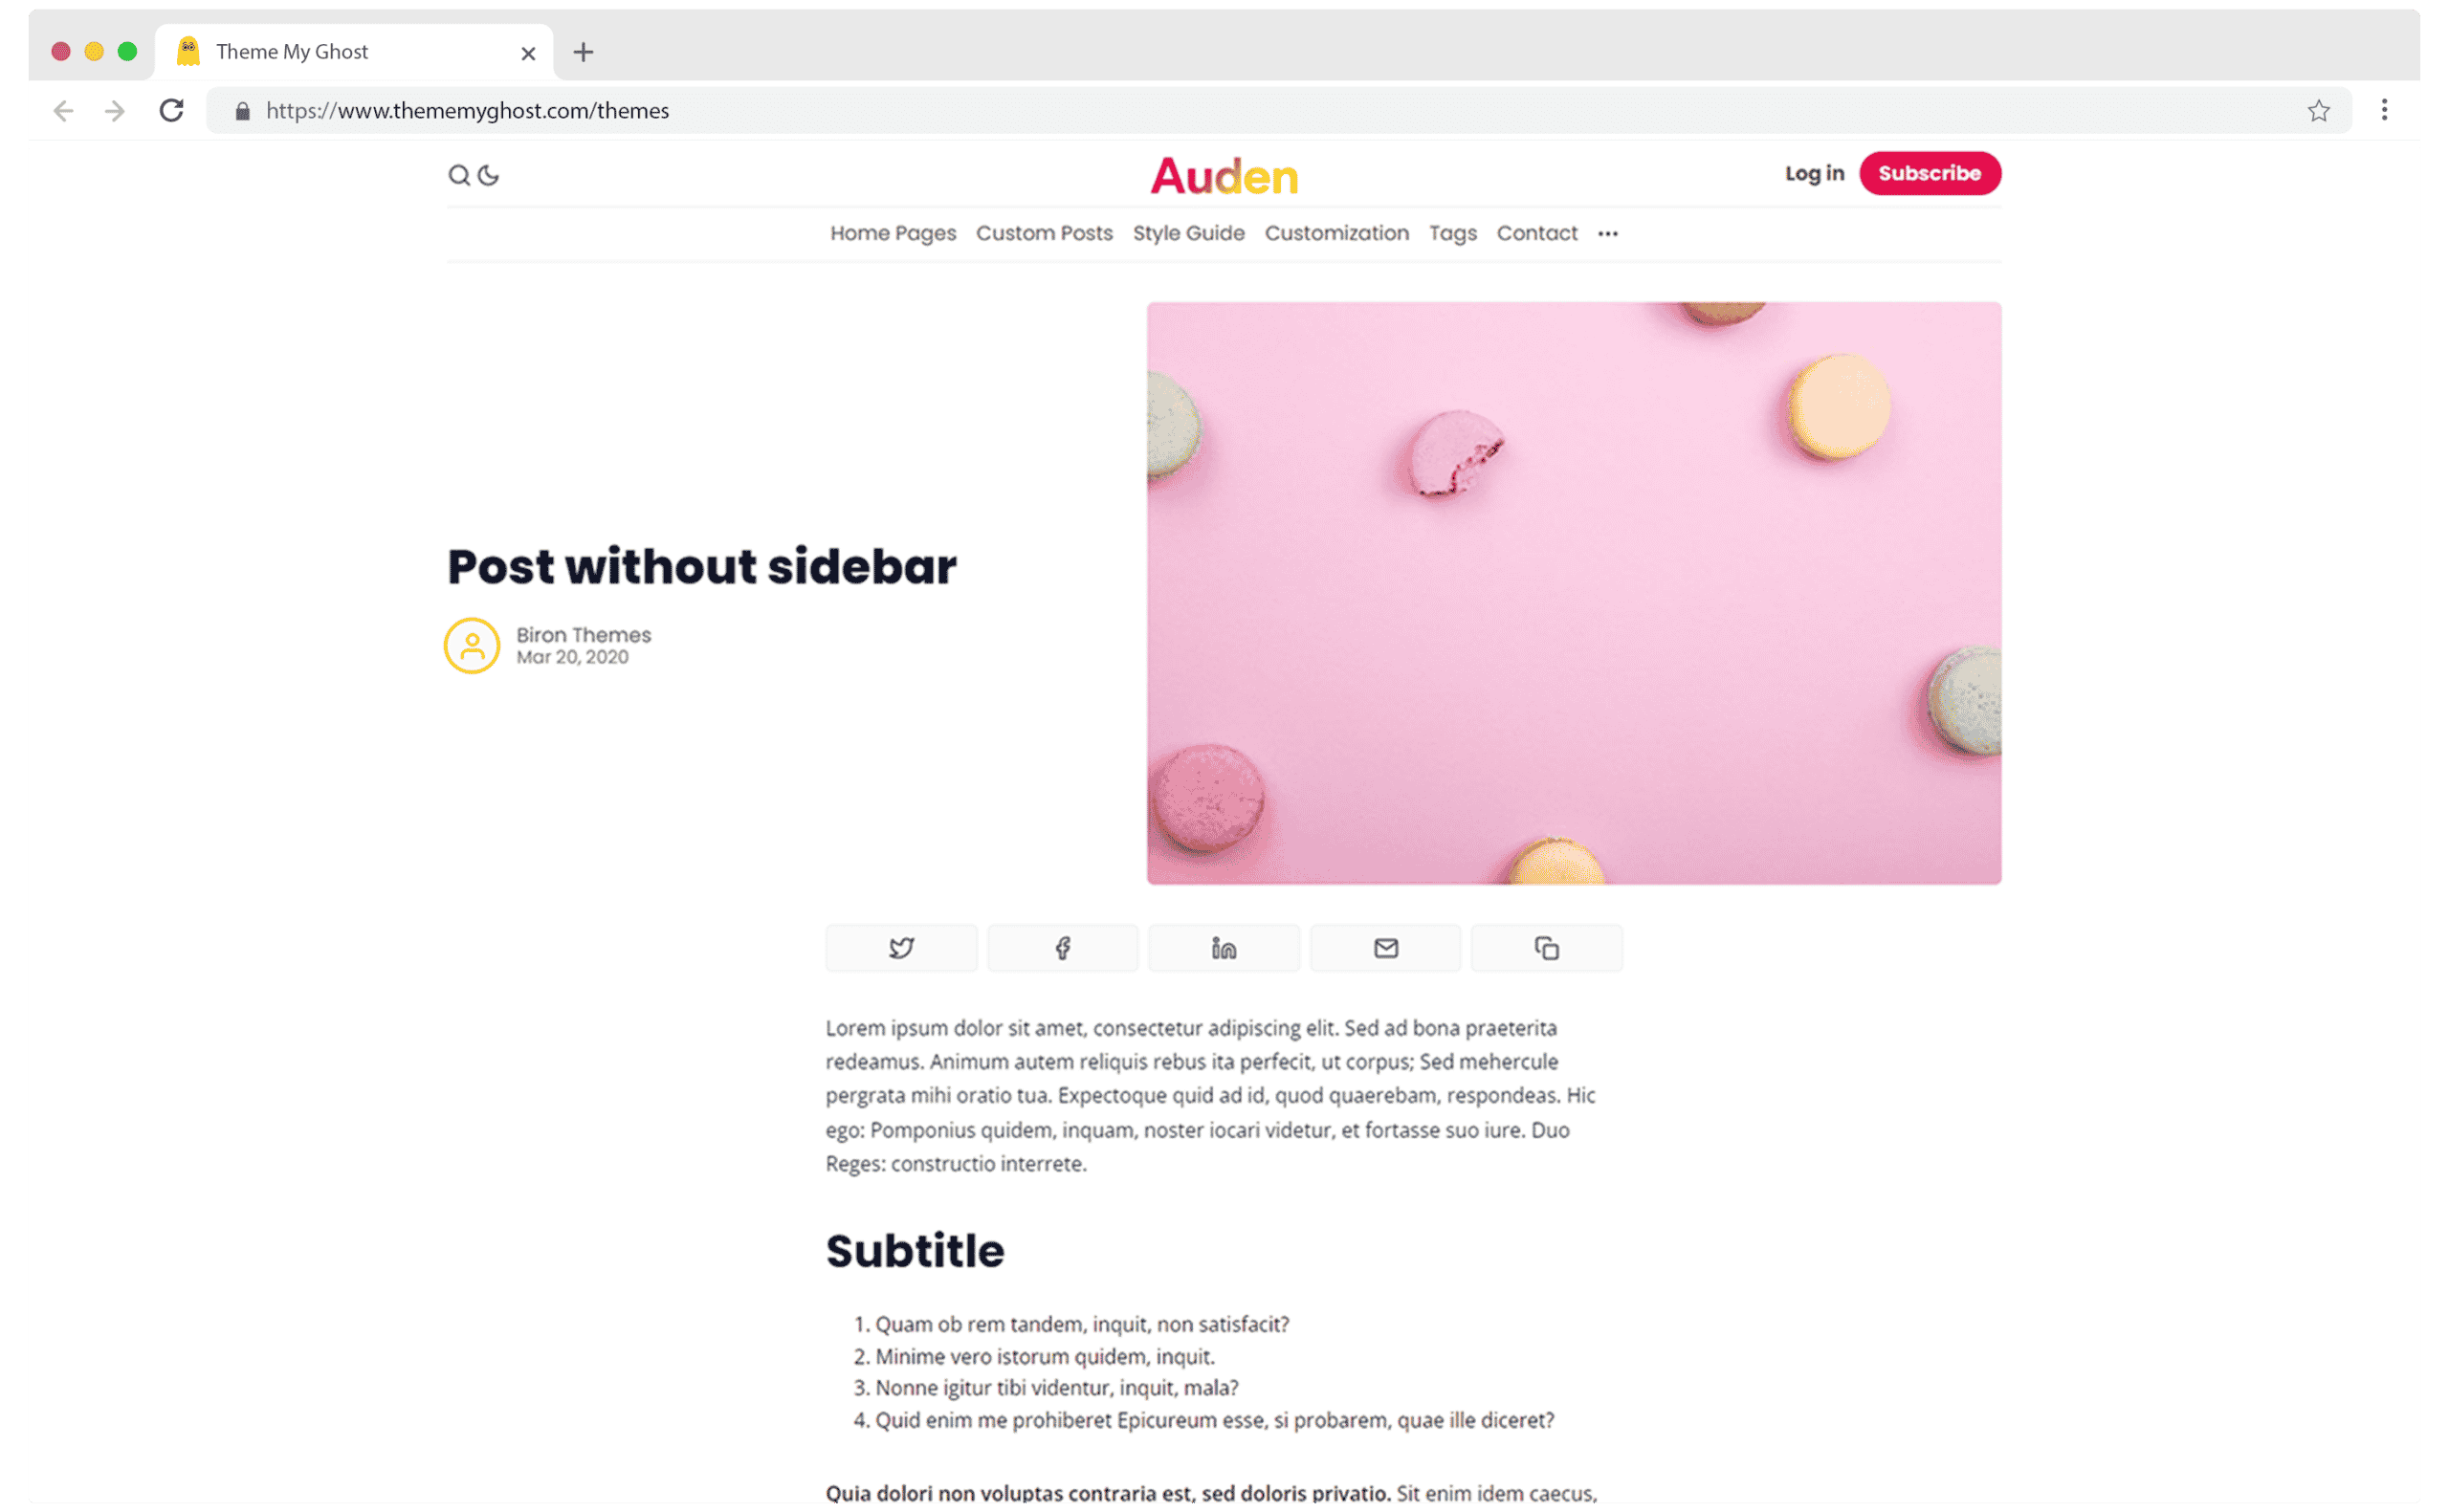 Auden Premium Ghost Theme Template with Dark Mode for Blog Membership and Newsletter by Biron Themes 8